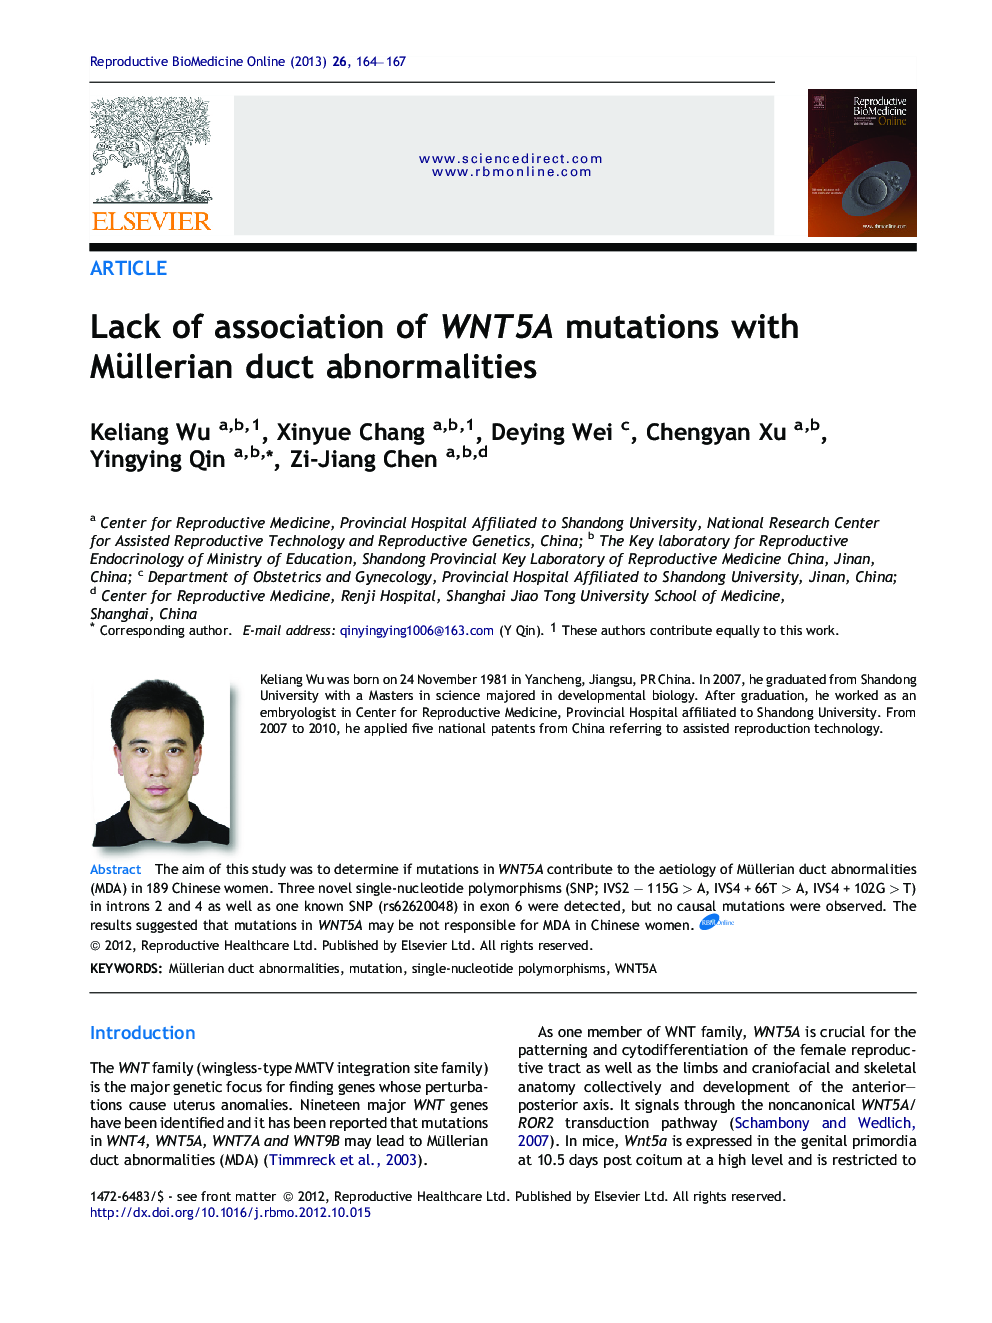 Lack of association of WNT5A mutations with Müllerian duct abnormalities 